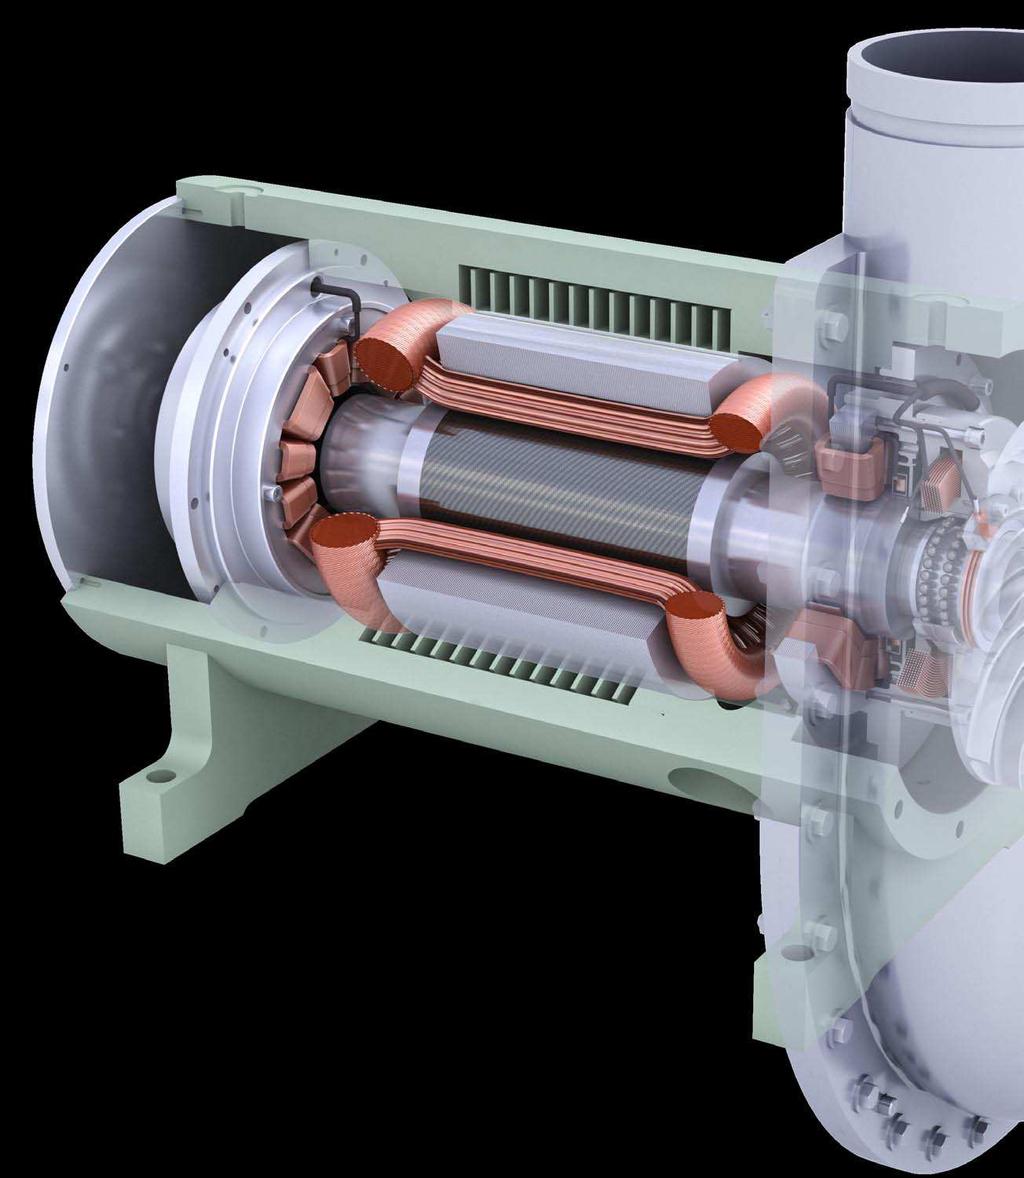 A complete magnetic system solution, only from SKF For centrifugal air blowers, few technologies can match the